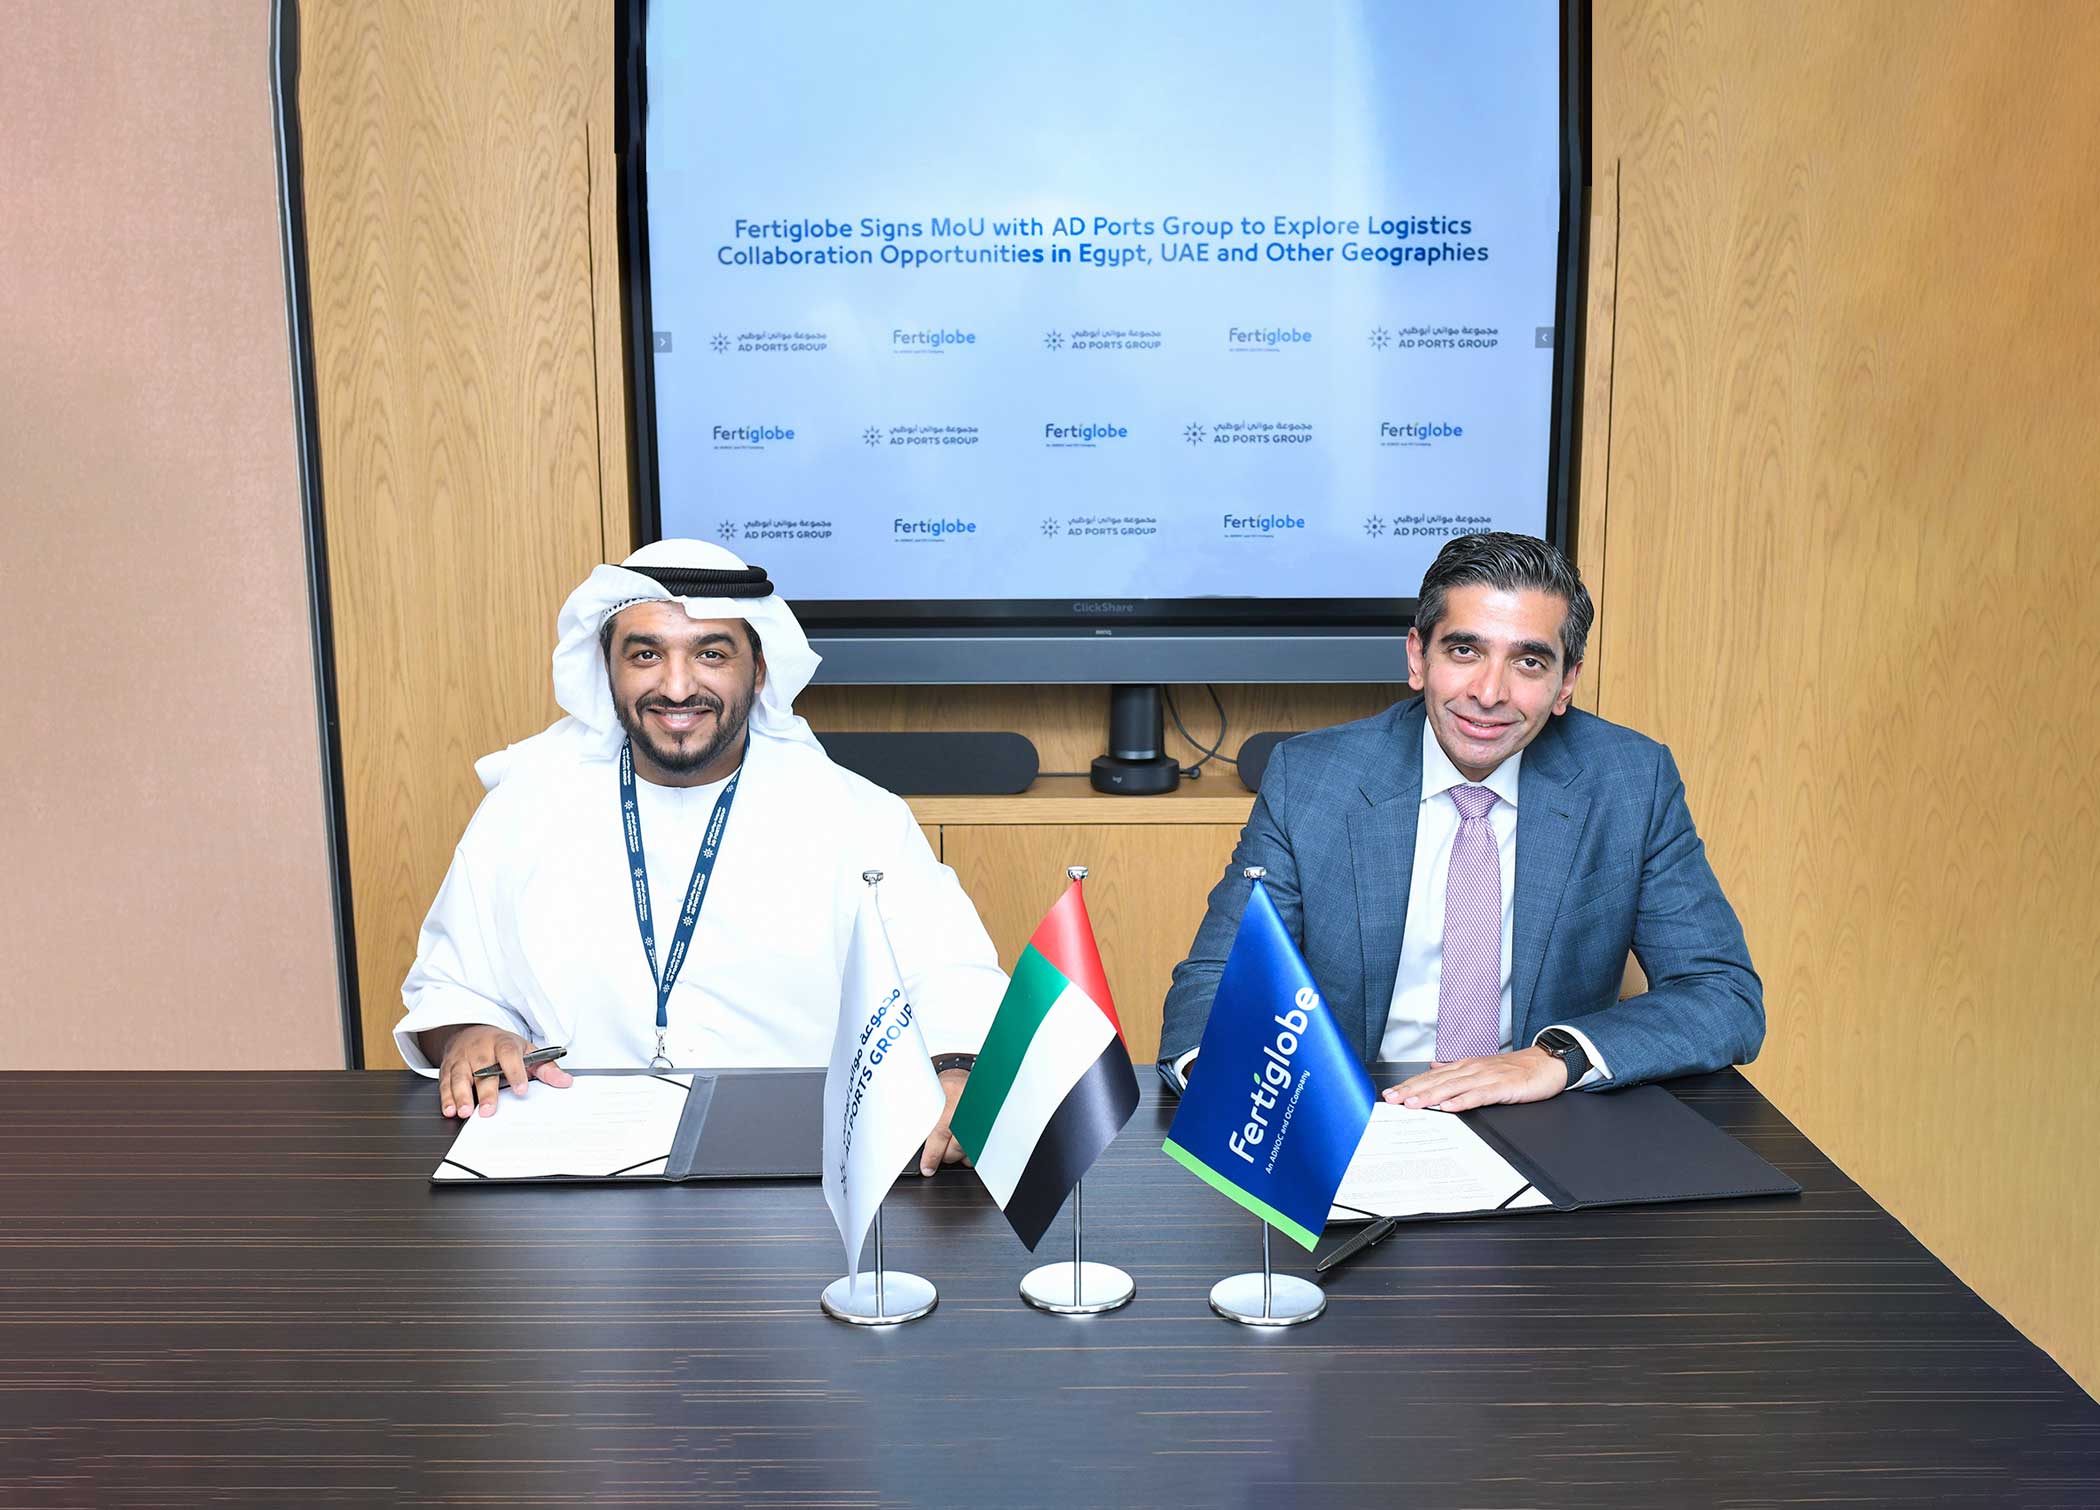 Fertiglobe Signs MoU with AD Ports Group to Explore Logistics Collaboration Opportunities in Egypt, UAE and Other Geographies